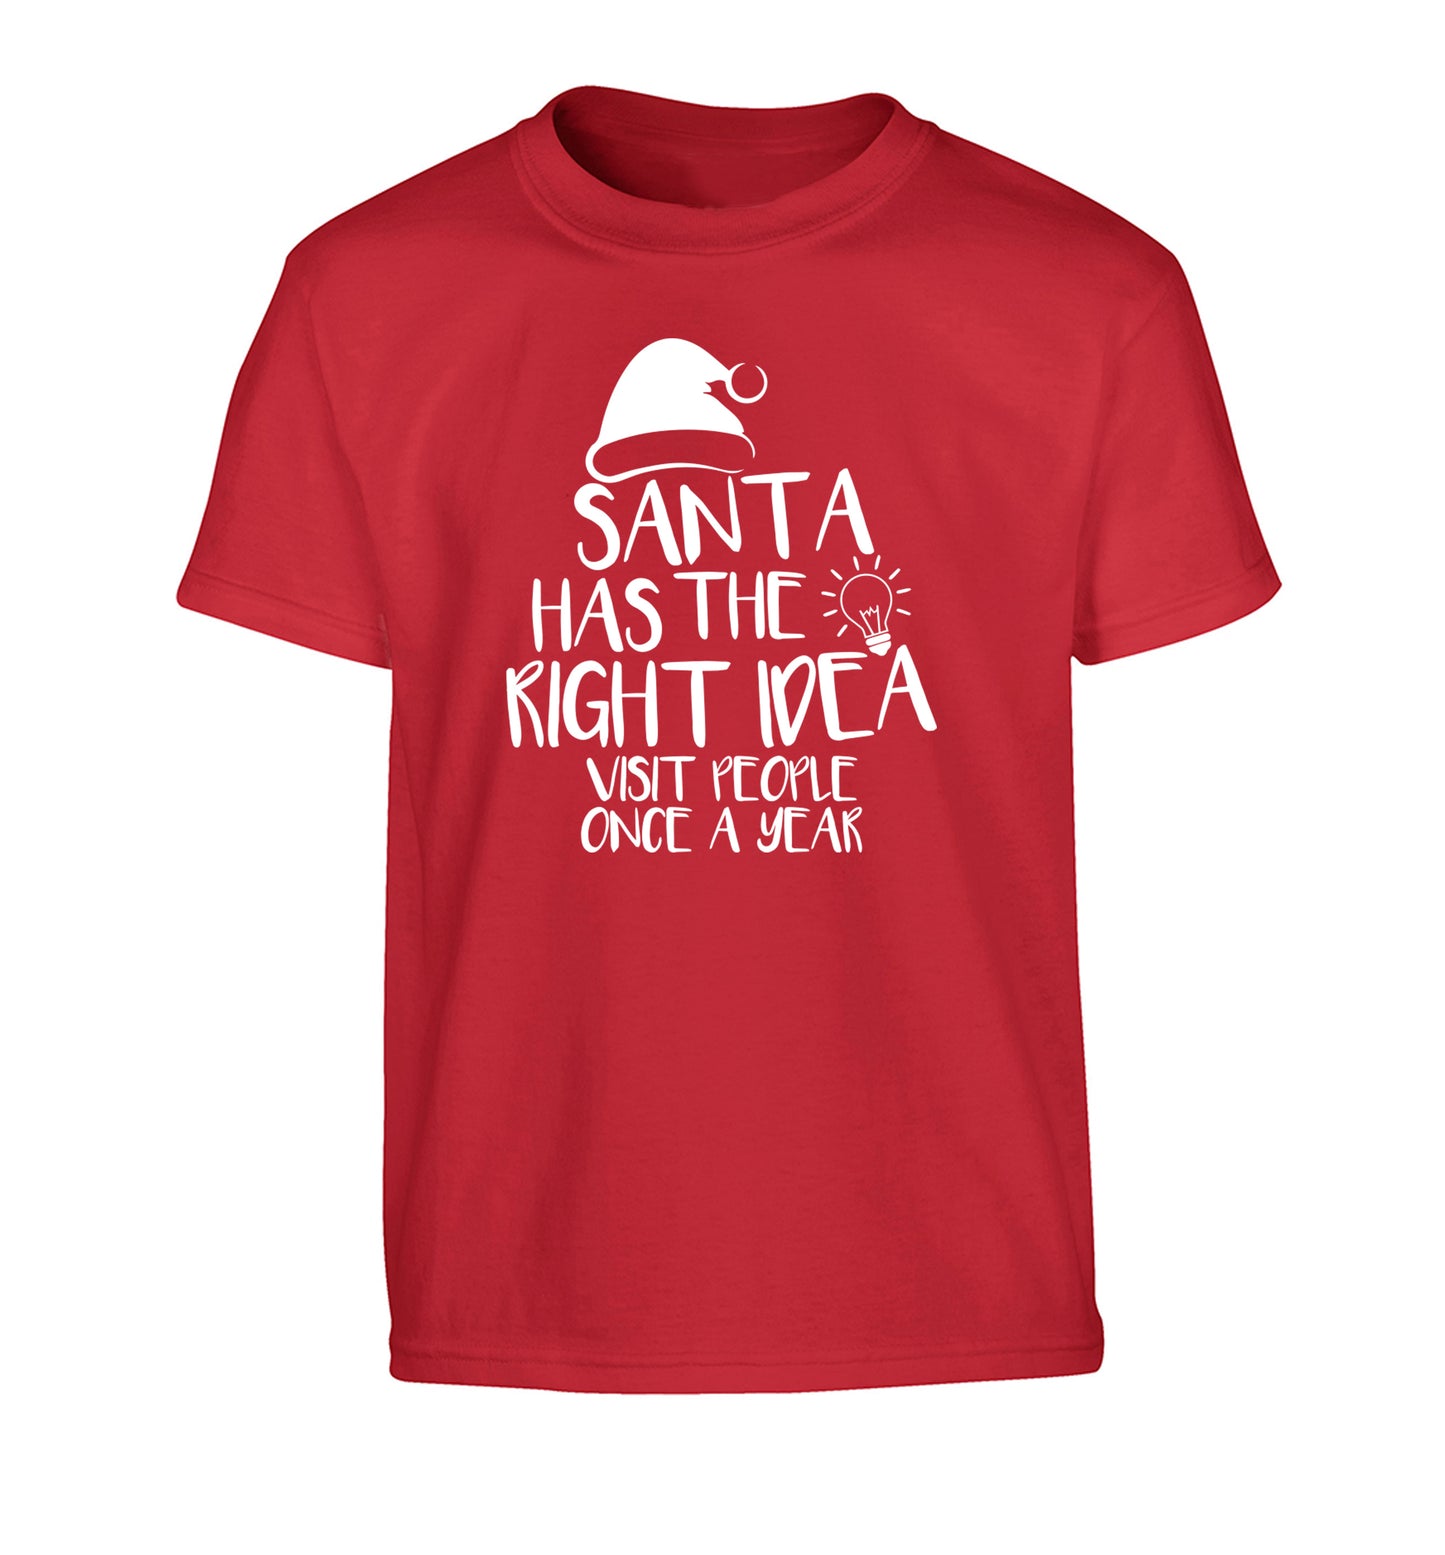 Santa has the right idea visit people once a year Children's red Tshirt 12-14 Years